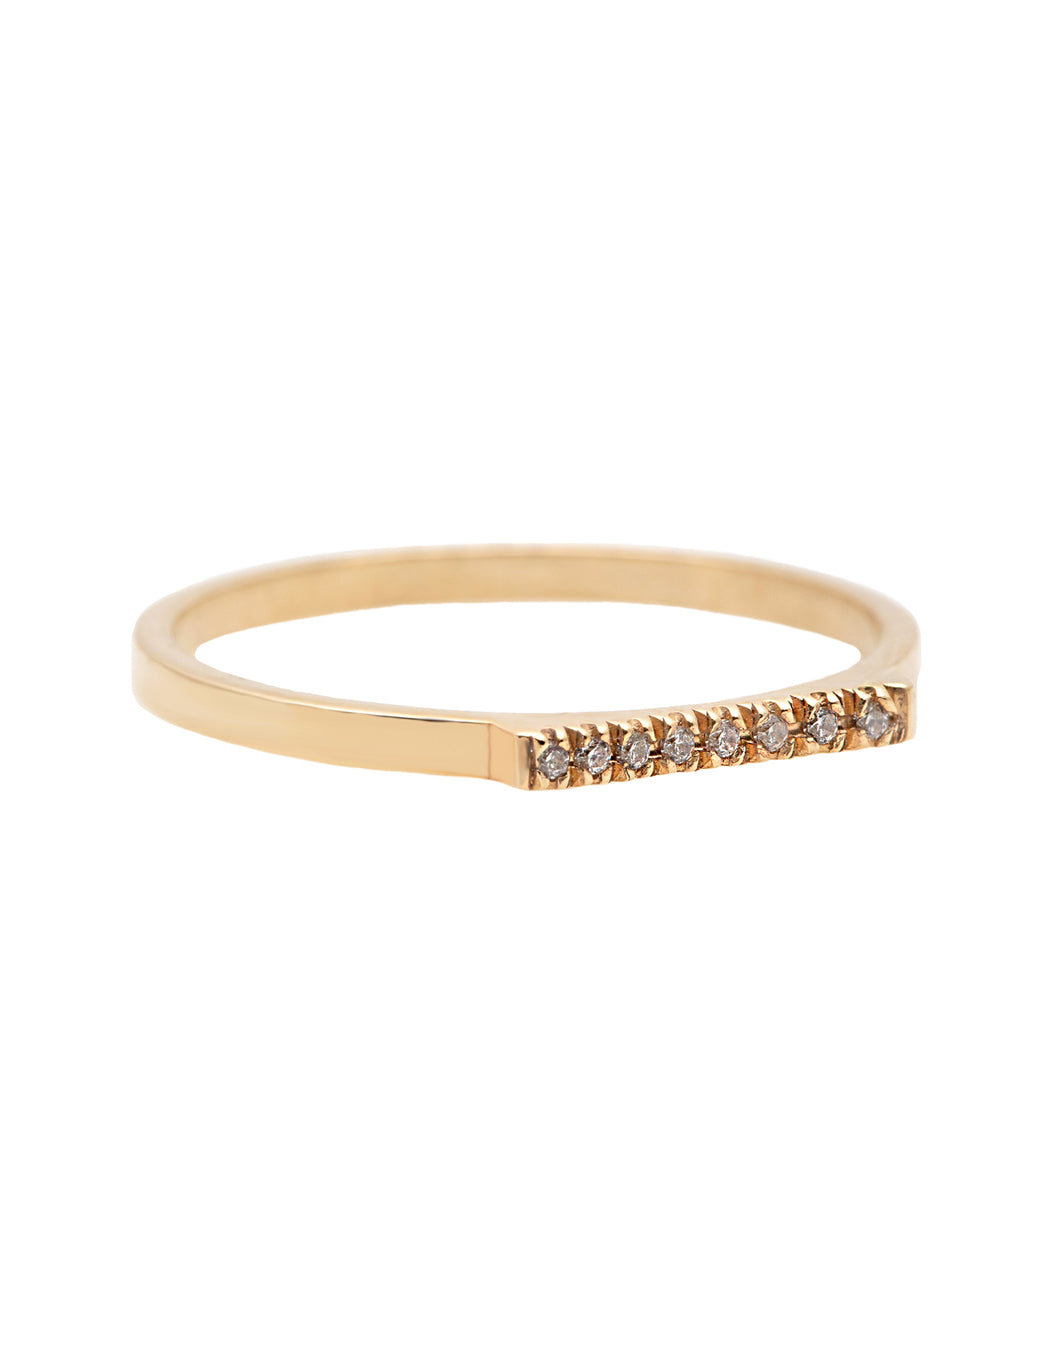 A delicate 14k yellow gold ring with a flat top set nine brilliant cut white diamonds, 0.01 carat each. 